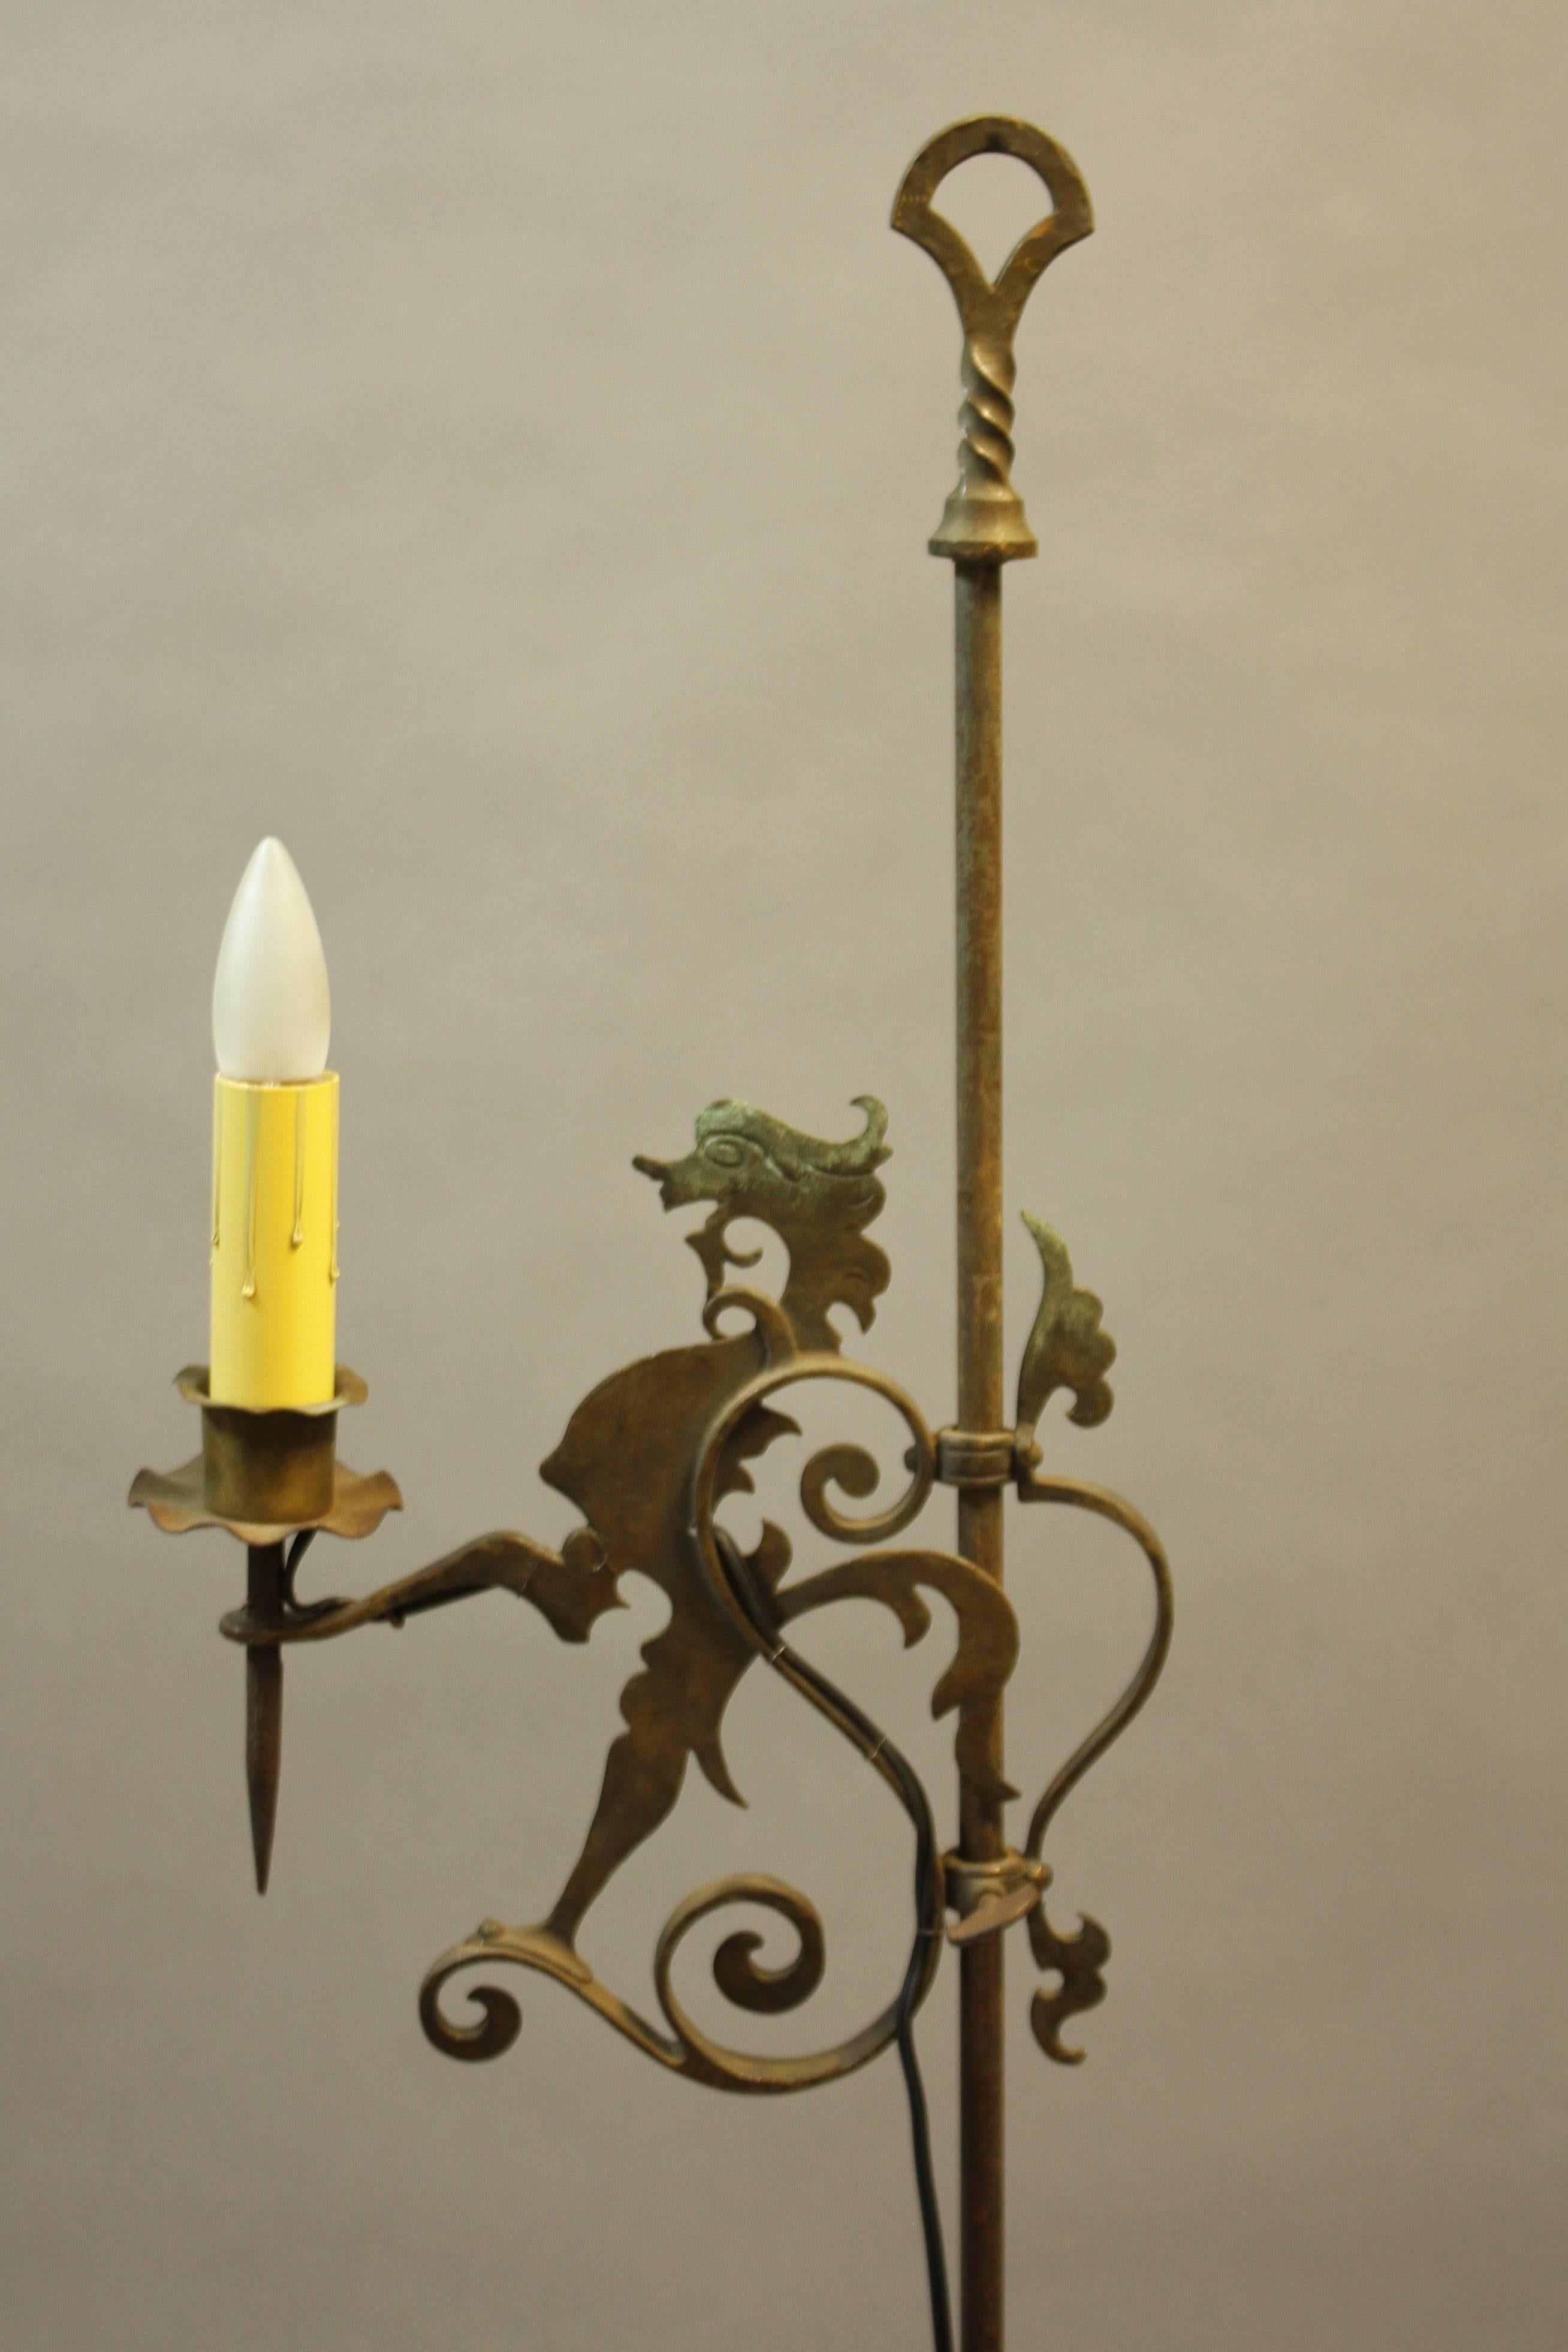 North American Antique Adjustable Standing Lamp with Dragon Figure